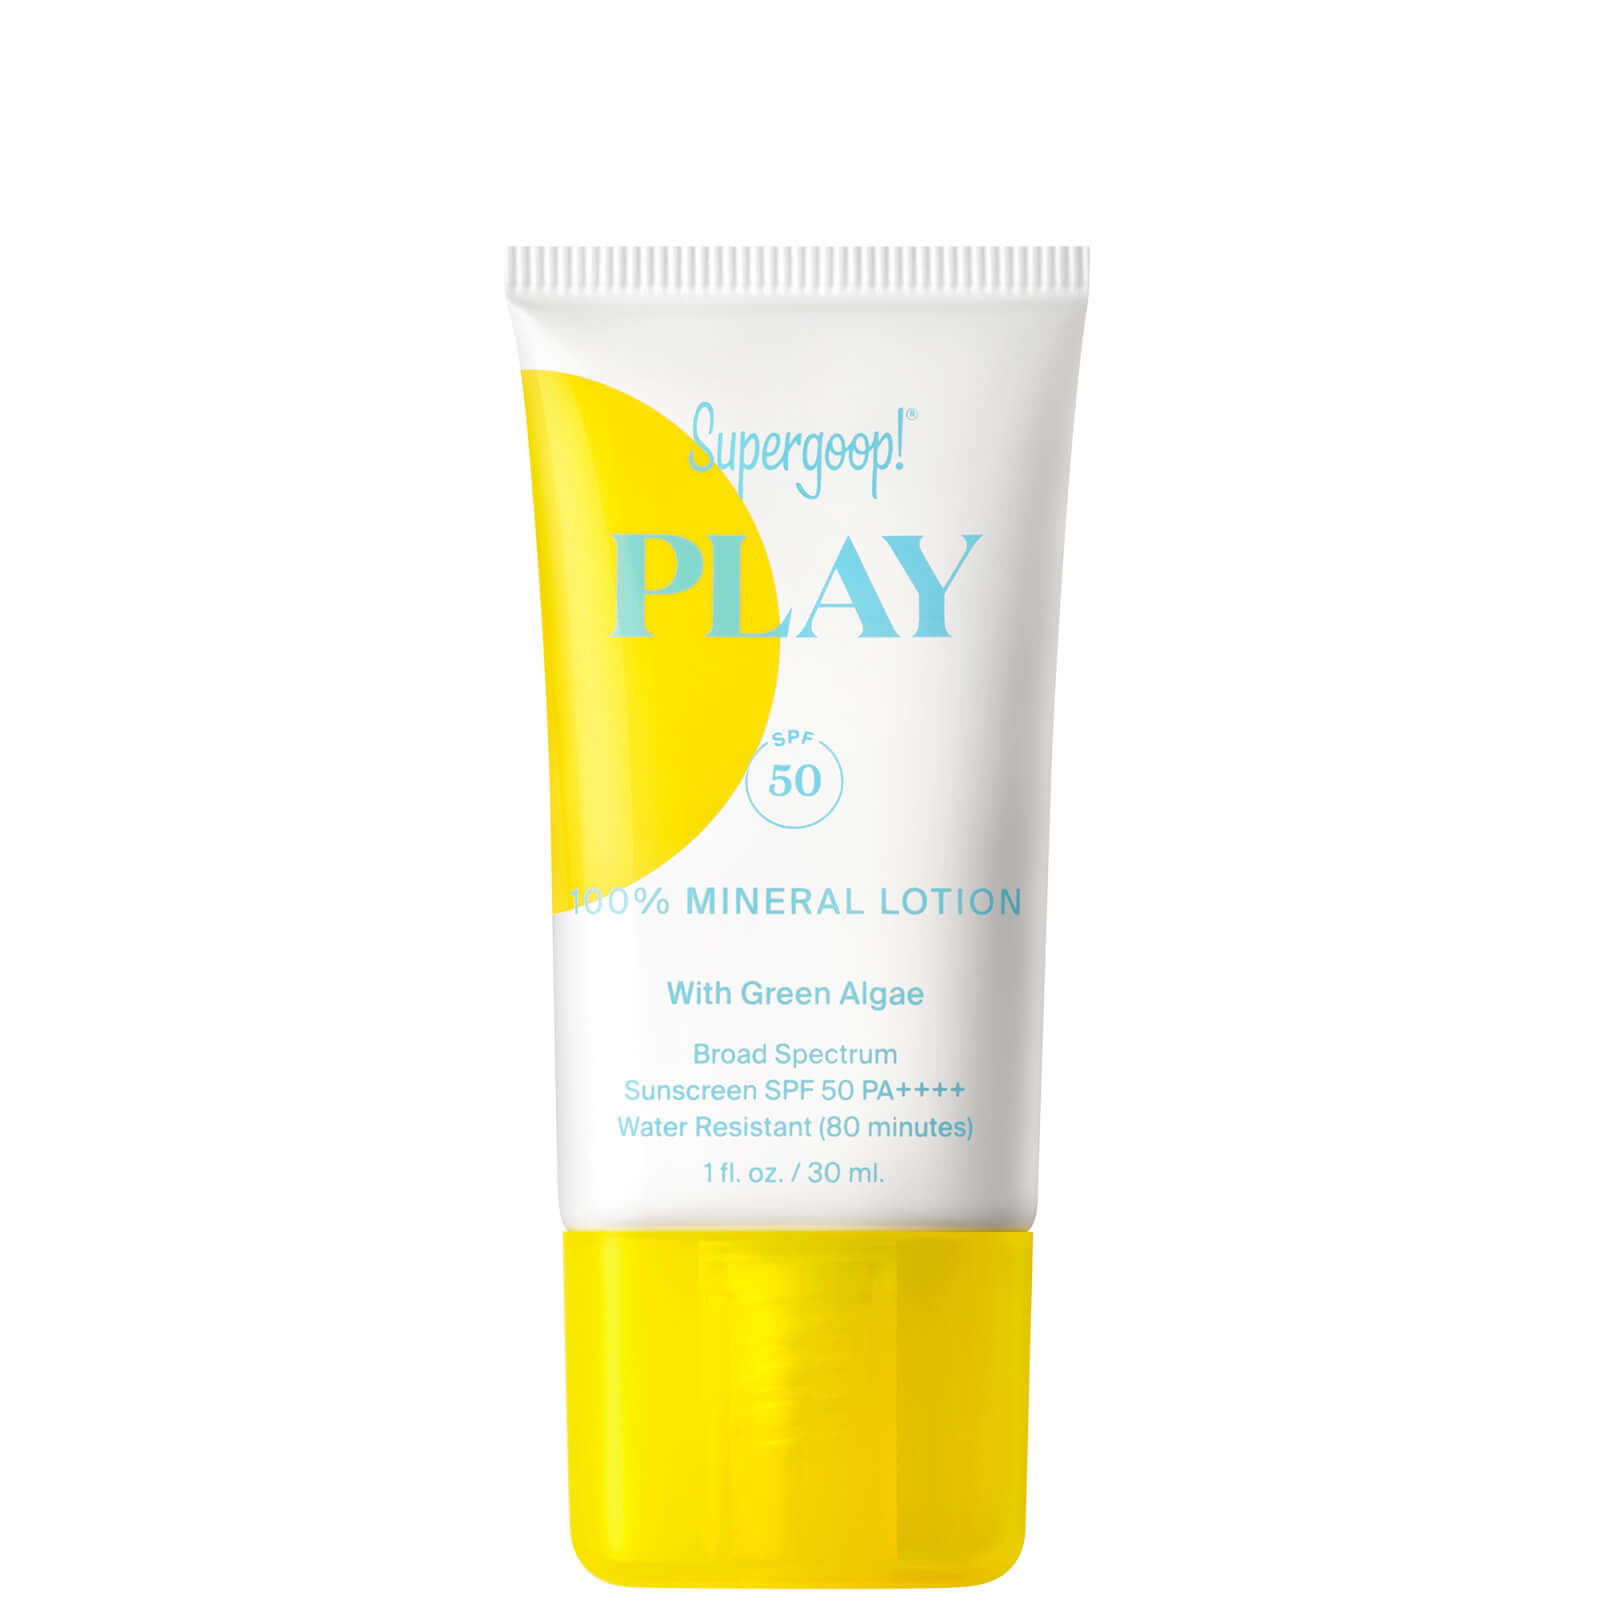 Supergoop Play 100% Mineral Lotion Spf50 With Green Algae 1 Fl. oz